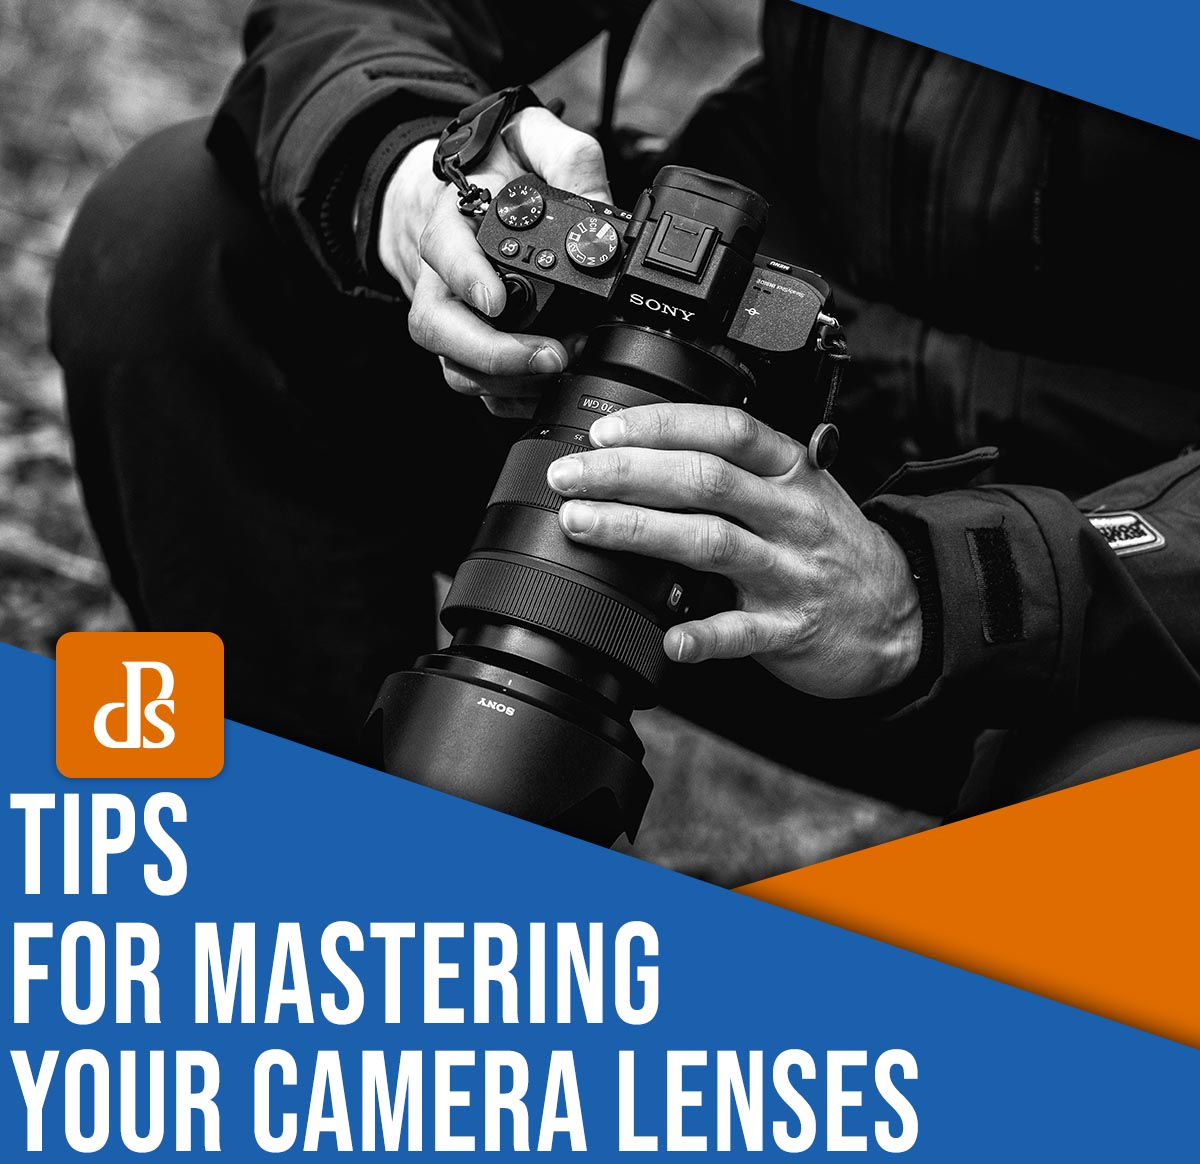 Tips for mastering your camera lenses